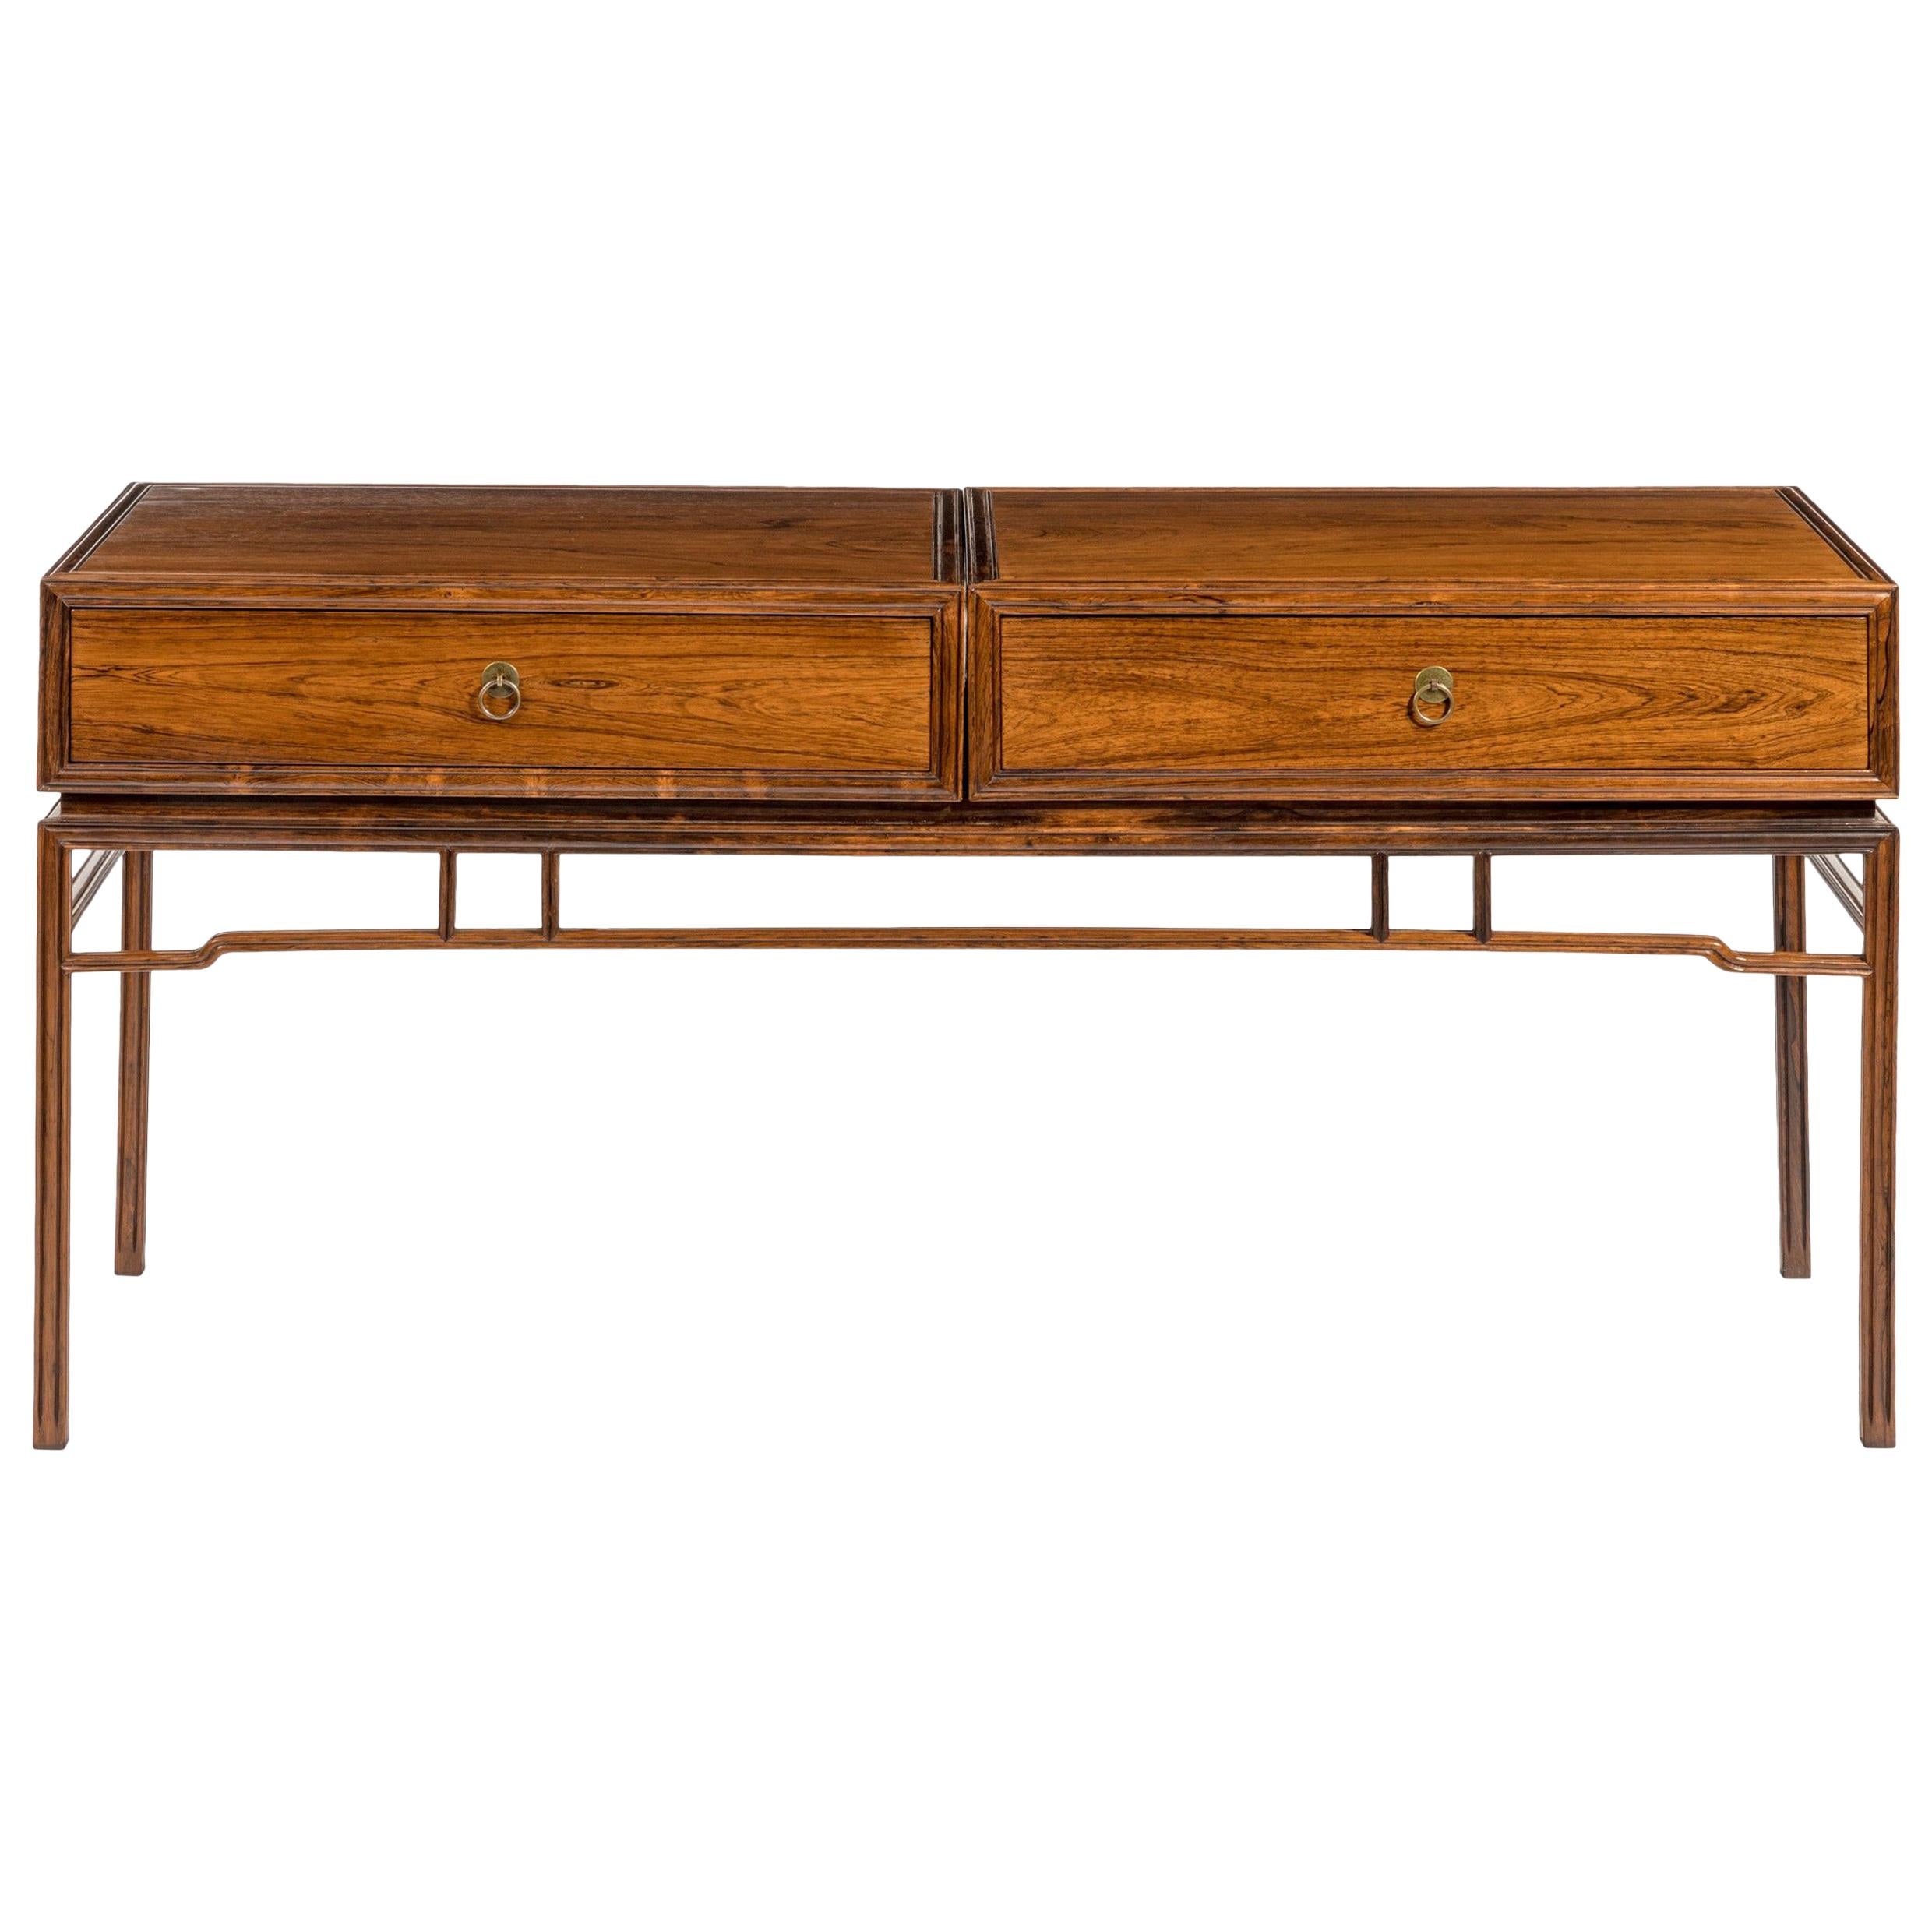 Midcentury Hardwood ‘Rosewood’ with a Chinese Influence, 1950